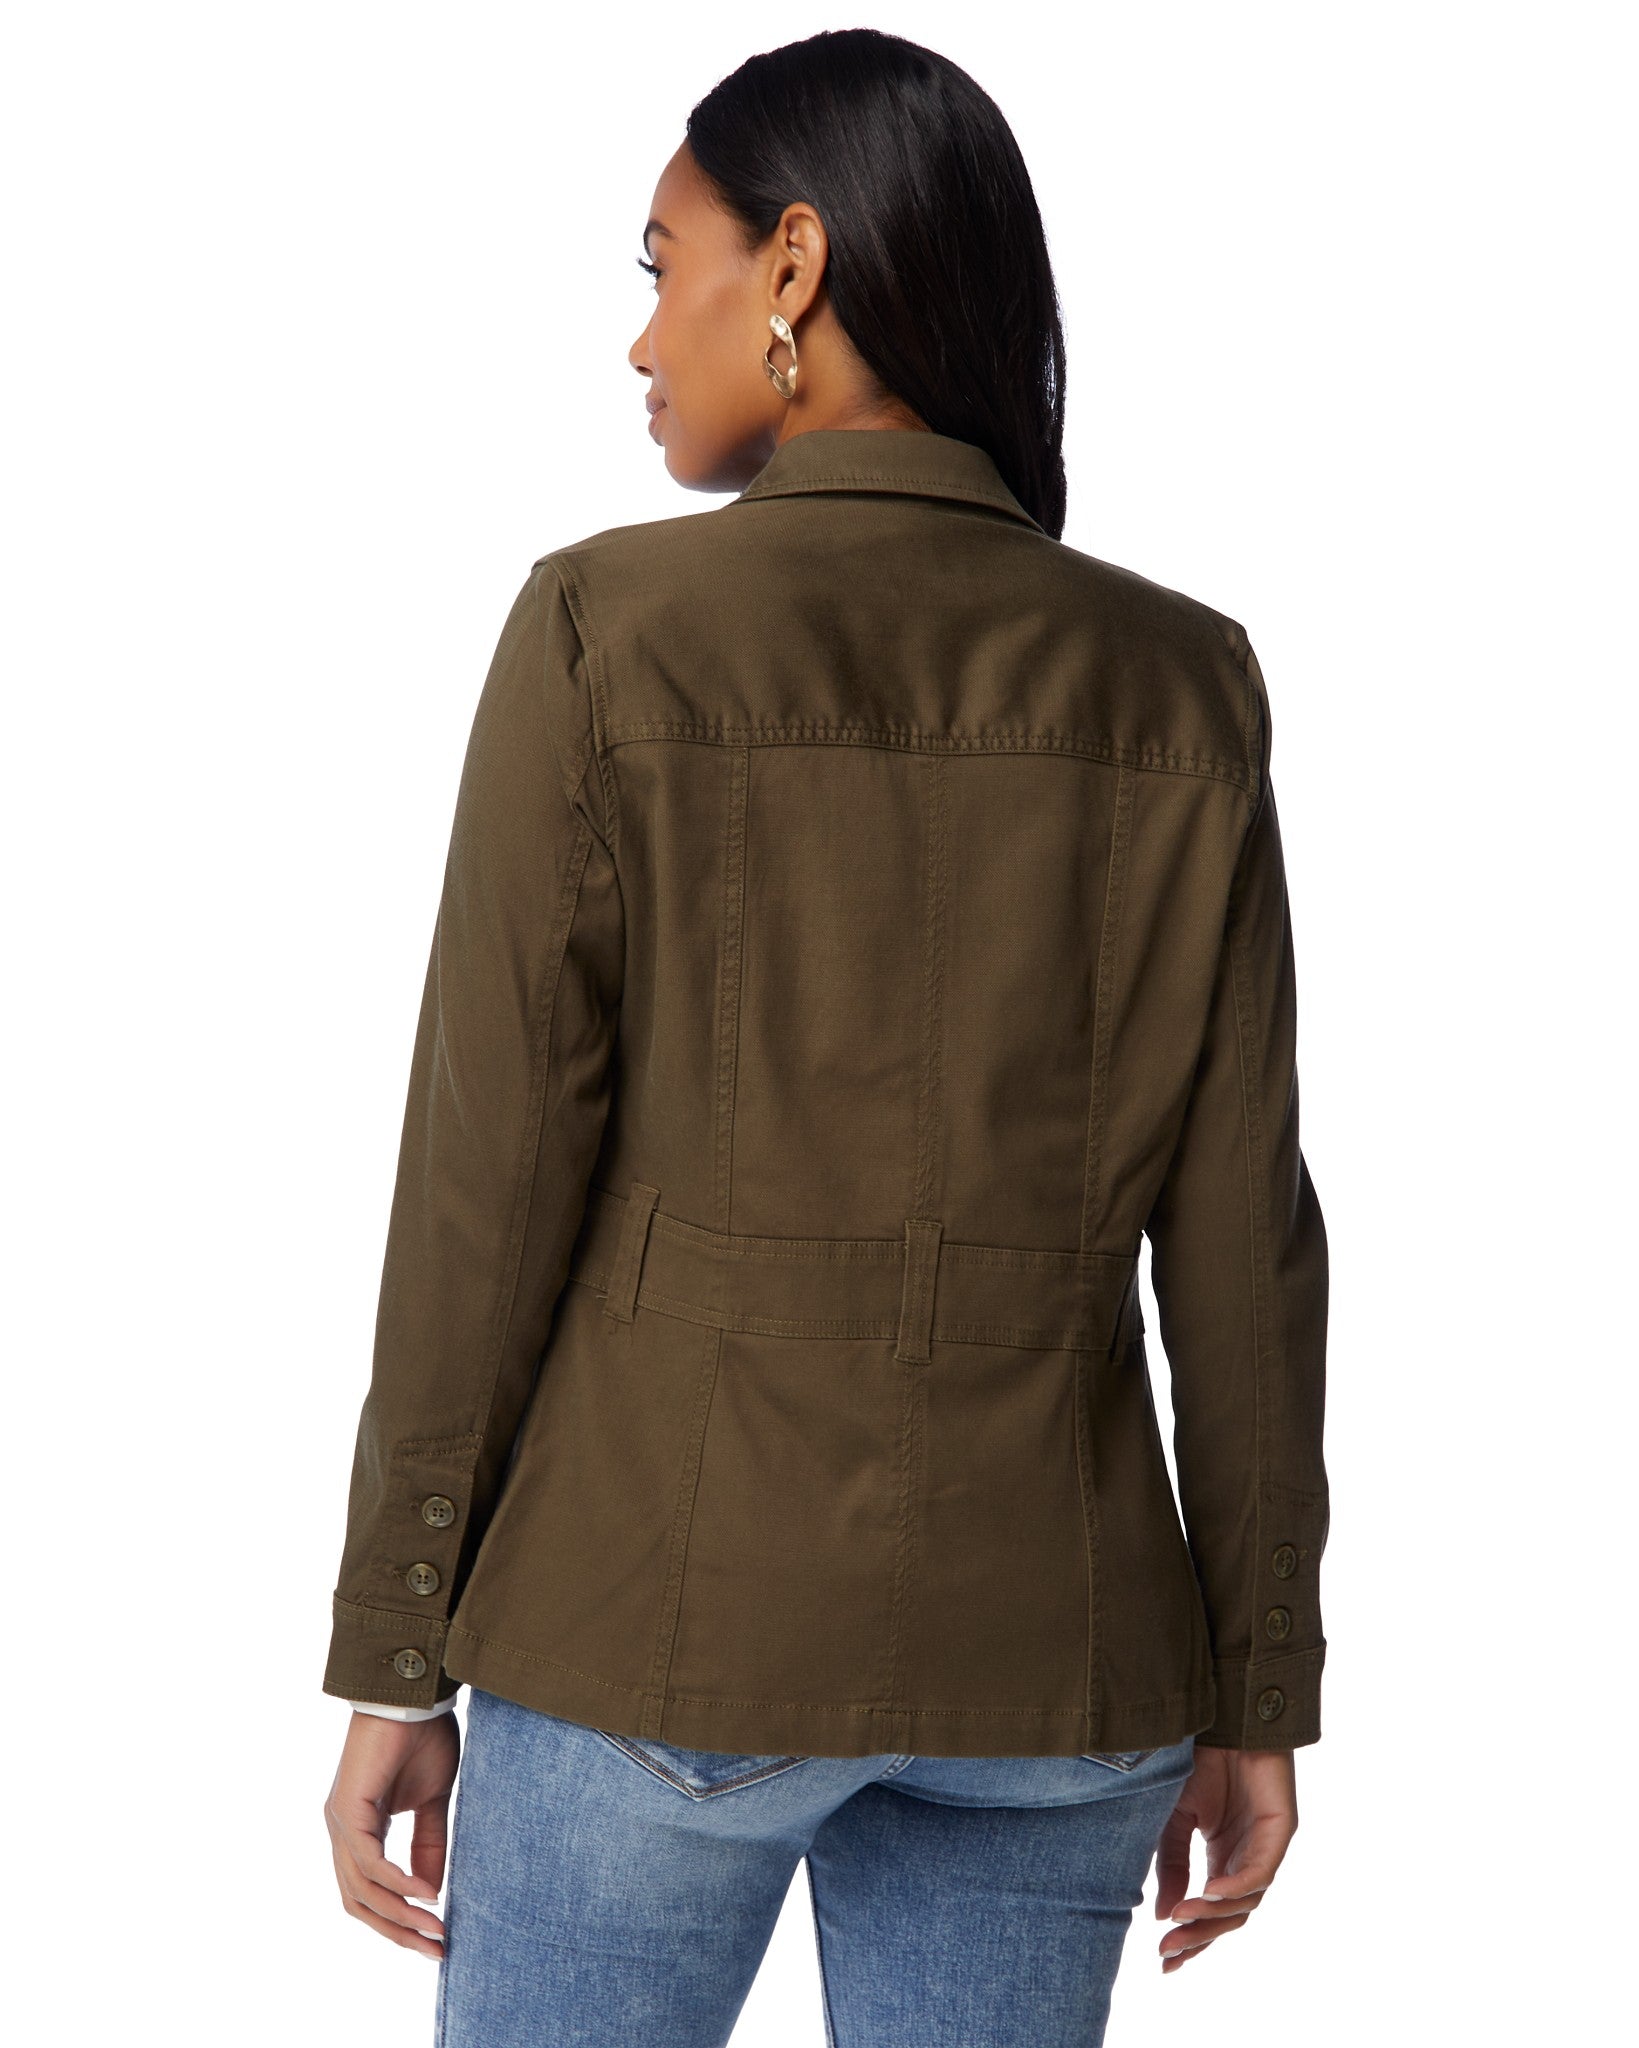 PROENZA SCHOULER WHITE LABEL Brushed Cotton Military Jacket in Natural |  Lyst